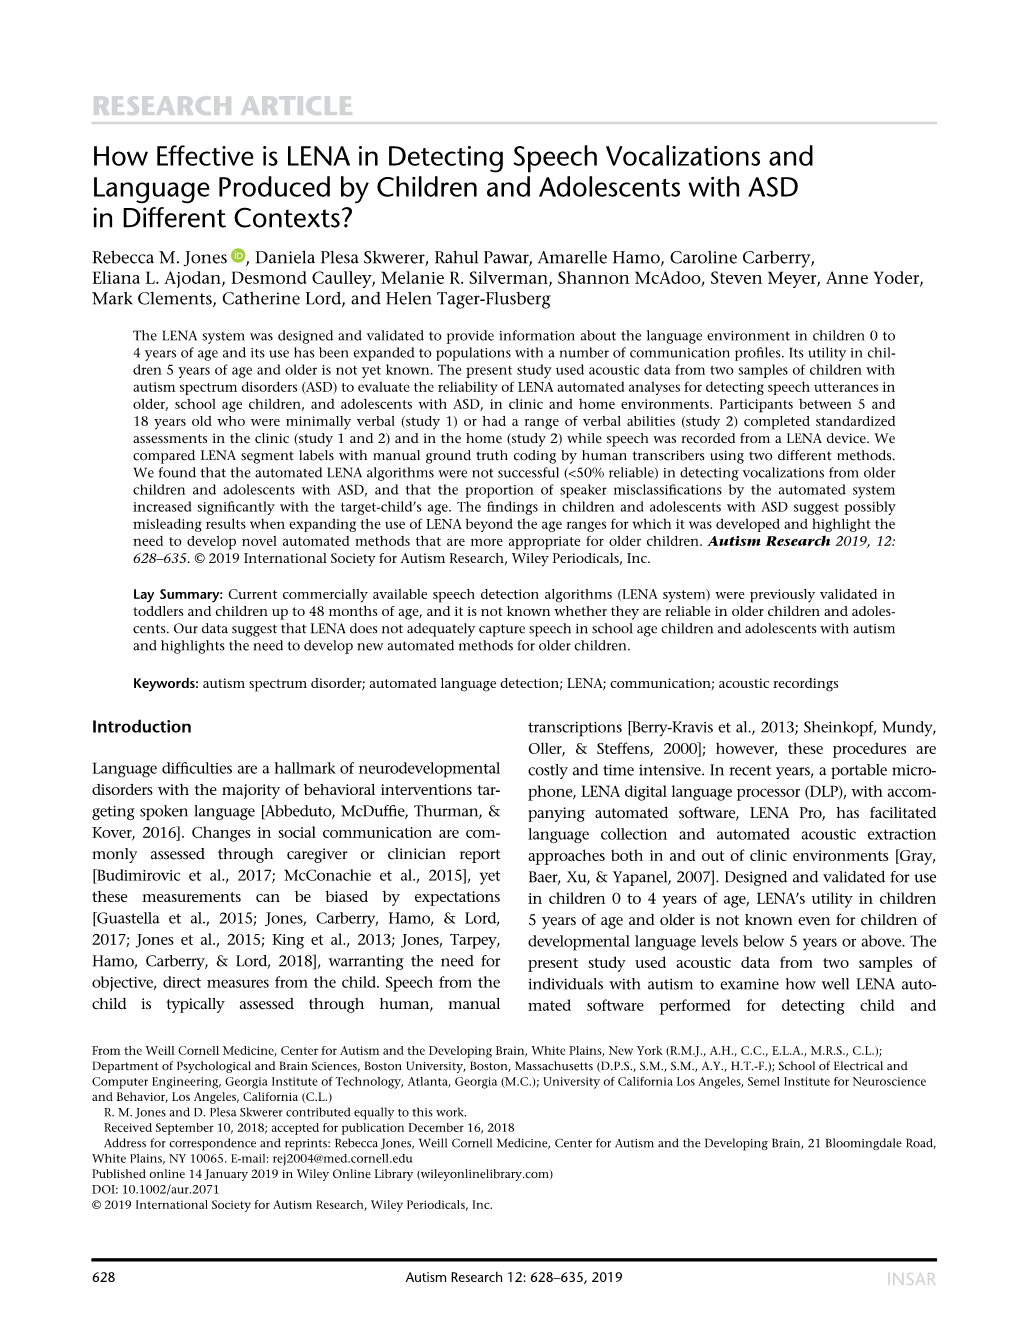 How Effective Is LENA in Detecting Speech Vocalizations and Language Produced by Children and Adolescents with ASD in Different Contexts? Rebecca M